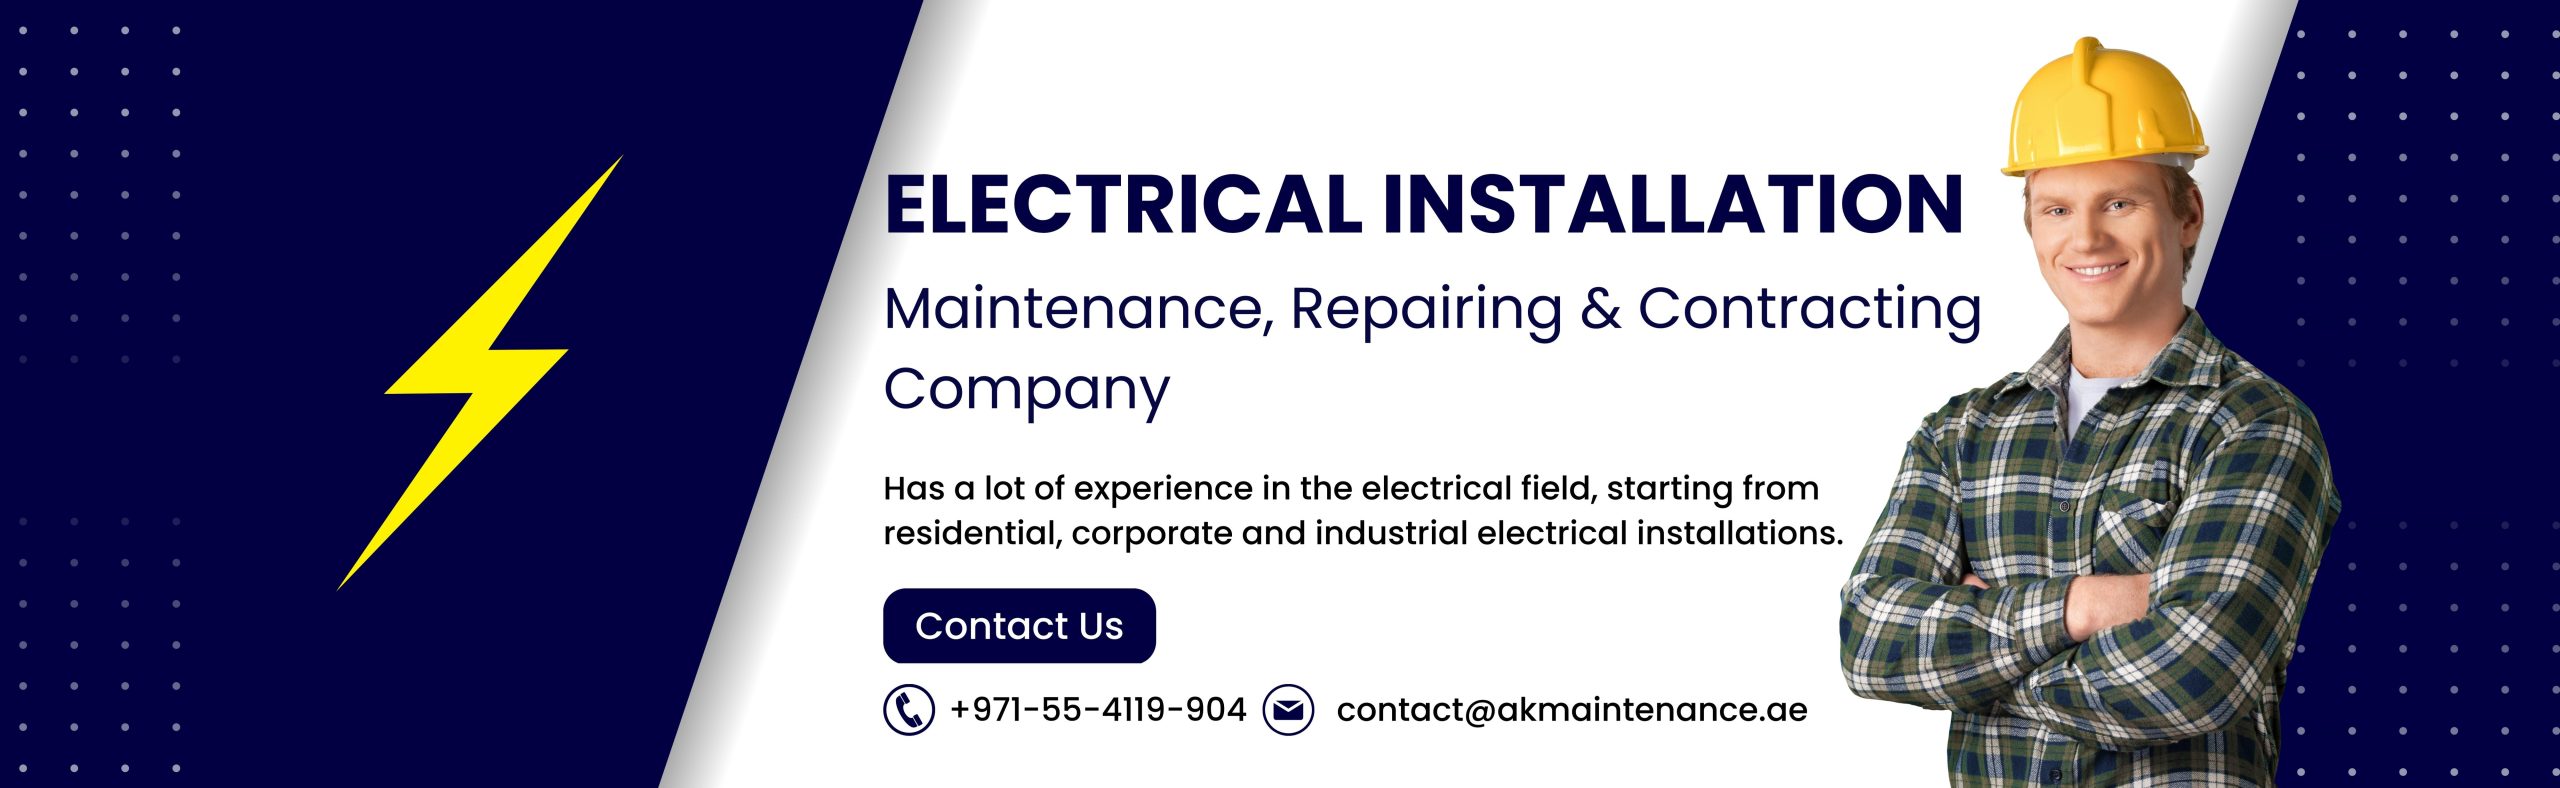 Electrical installation and maintenance company in Dubai